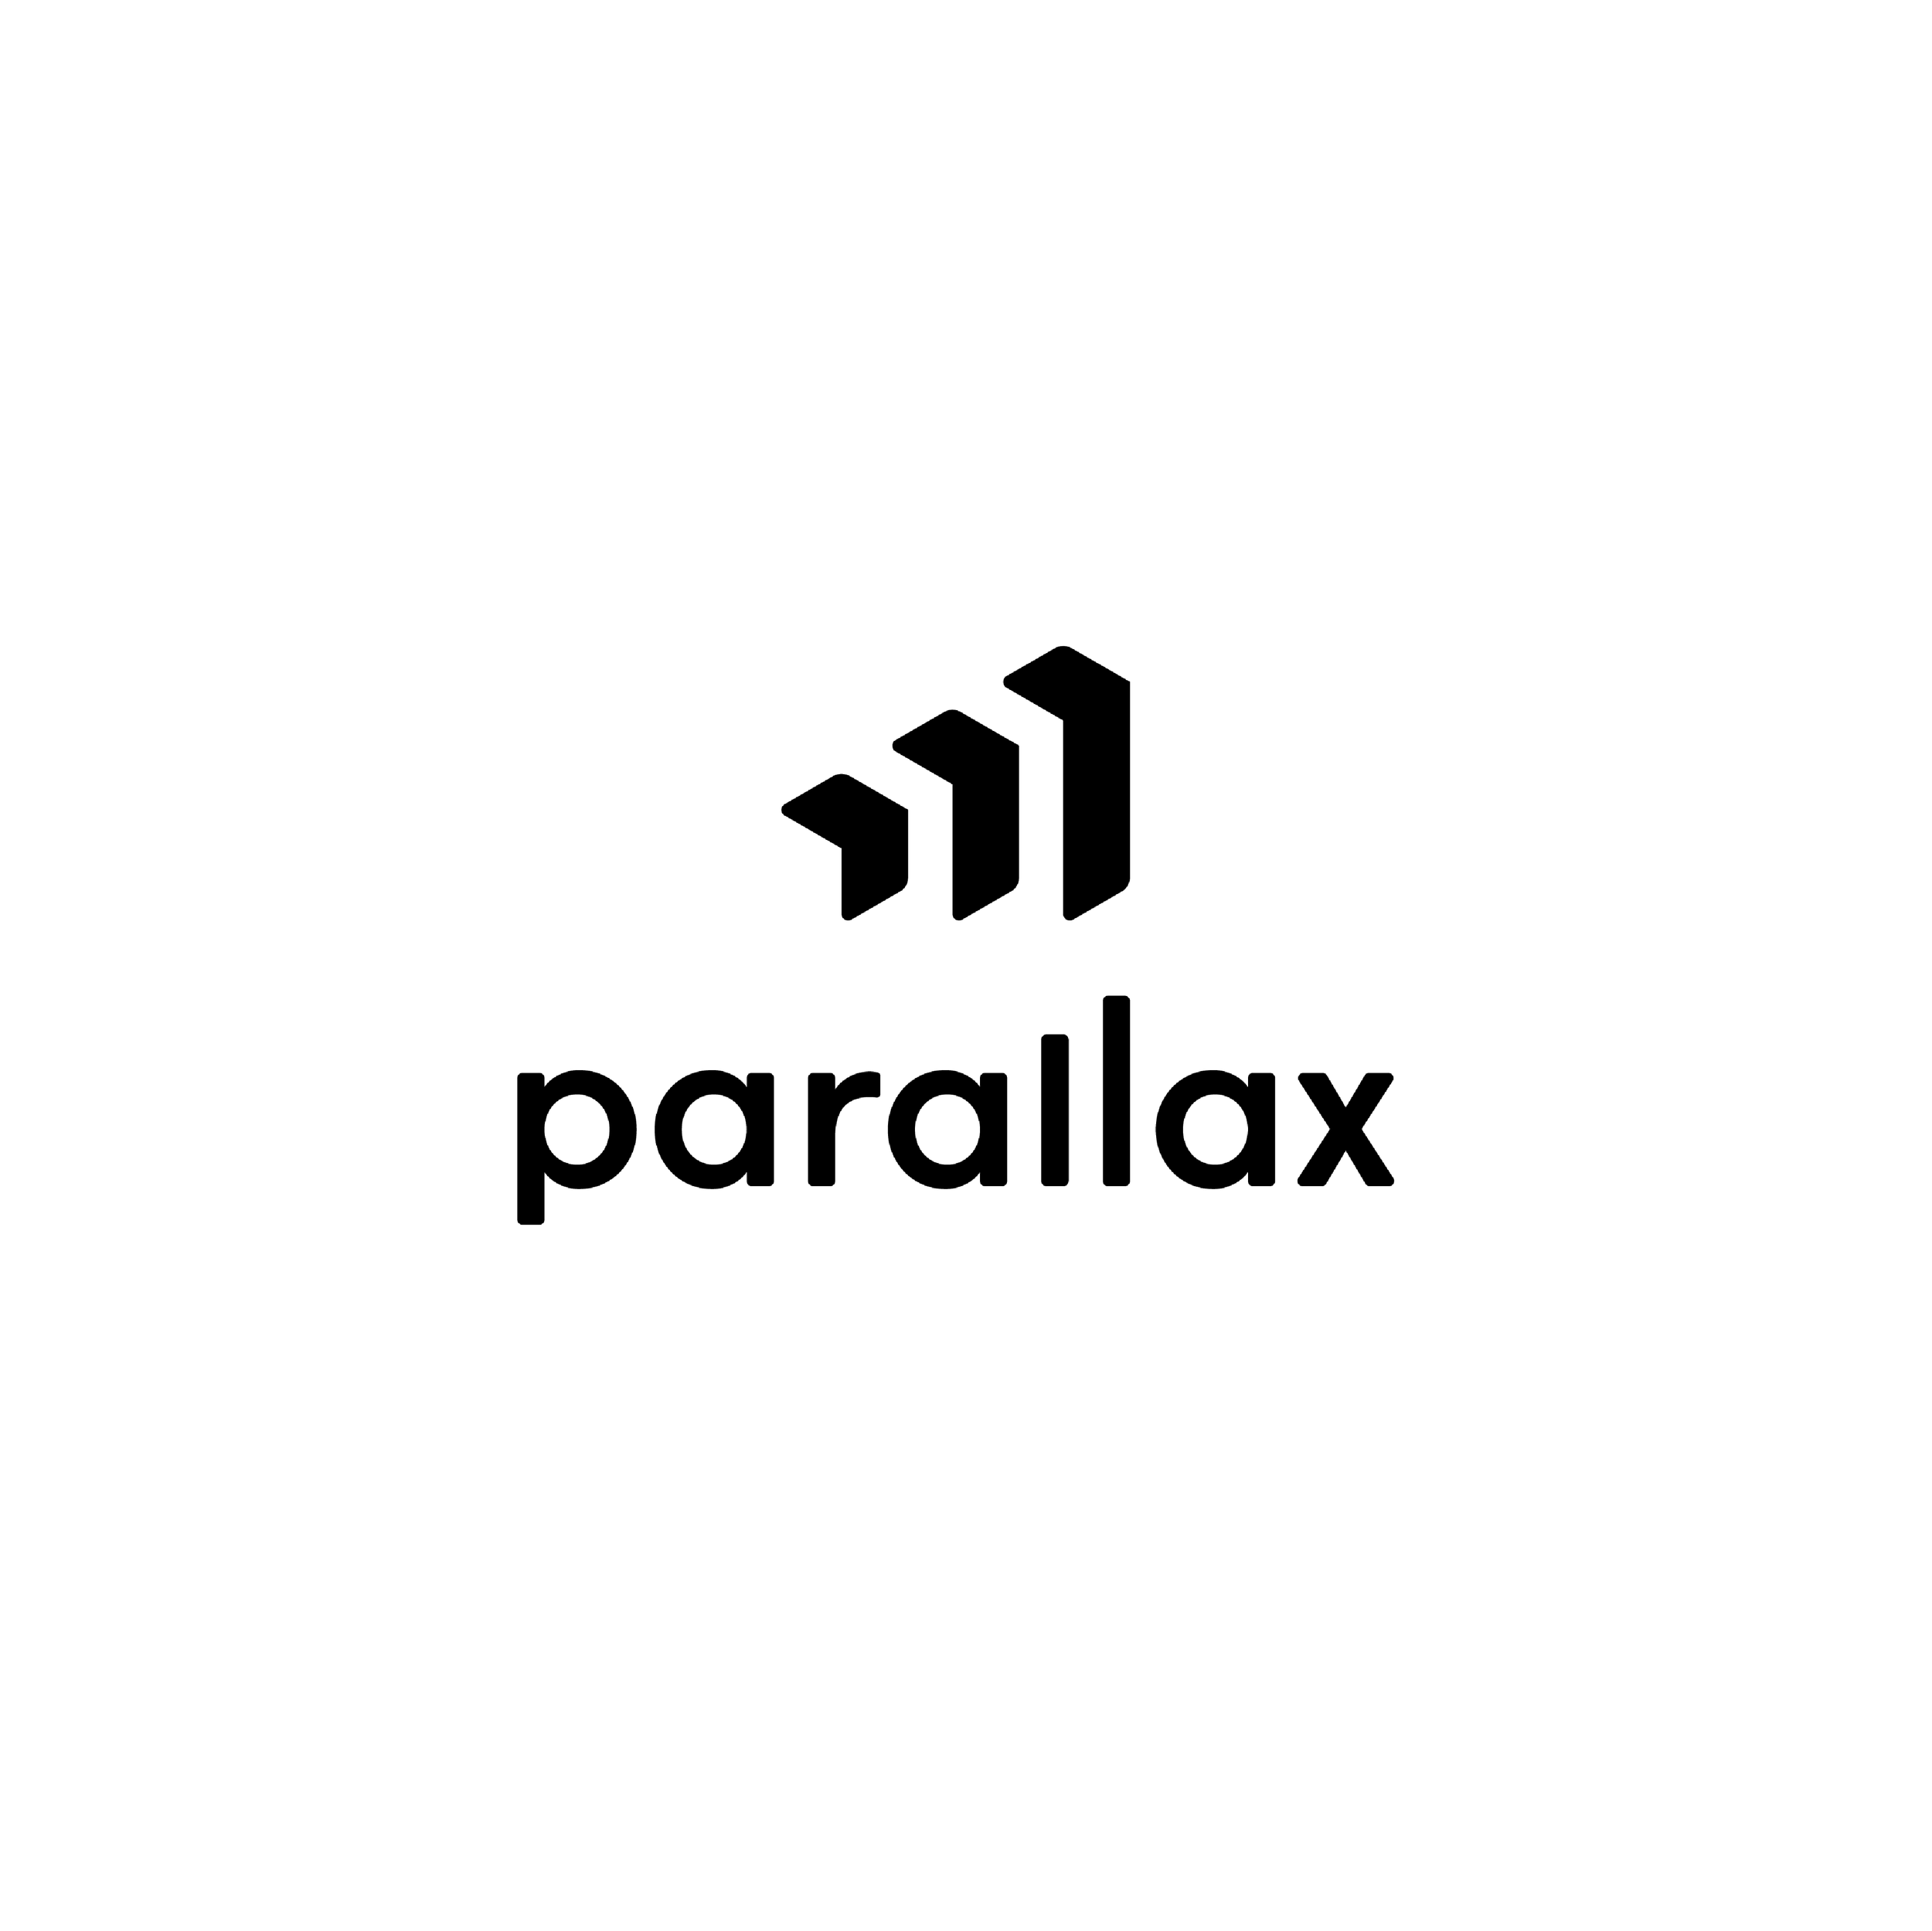 Parallax-11.png